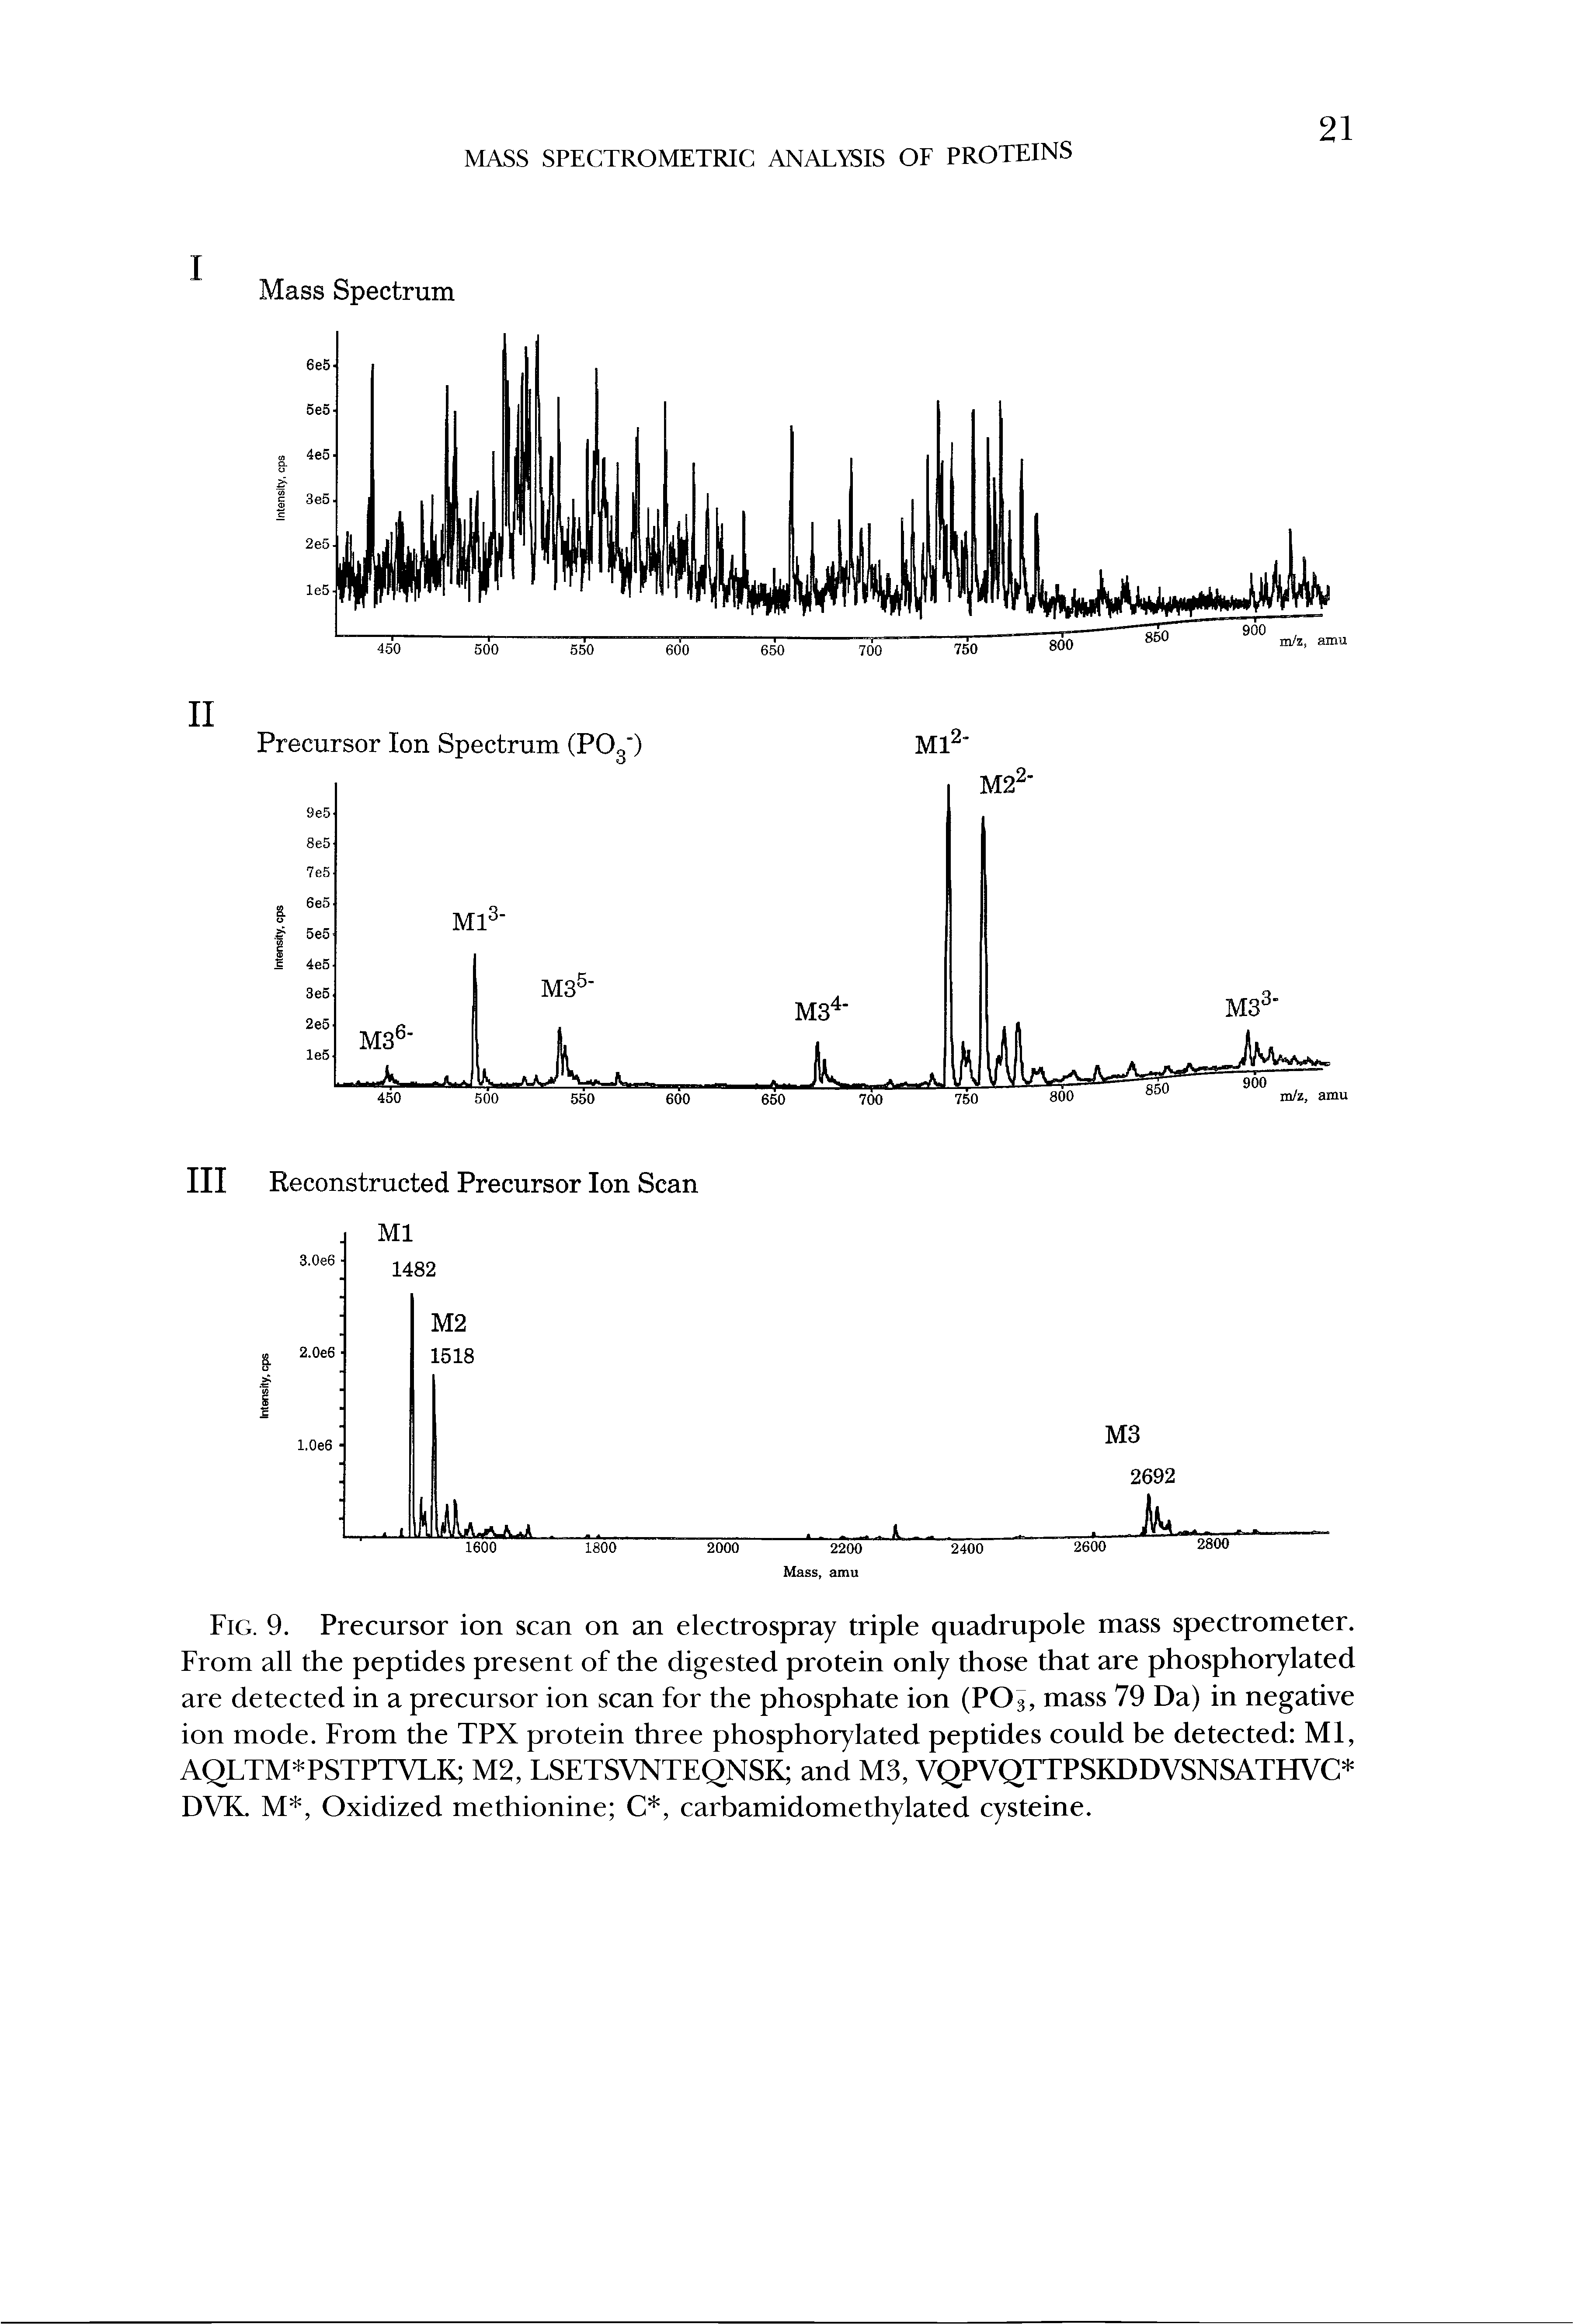 Fig. 9. Precursor ion scan on an electrospray triple quadrupole mass spectrometer. From all the peptides present of the digested protein only those that are phosphorylated are detected in a precursor ion scan for the phosphate ion (P03, mass 79 Da) in negative ion mode. From the TPX protein three phosphorylated peptides could be detected Ml, AQLTM PSTPTVLK M2, LSETSVNTEQNSK and M3, VQPVQTTPSKDDVSNSATHVC DVK. M, Oxidized methionine C, carbamidomethylated cysteine.